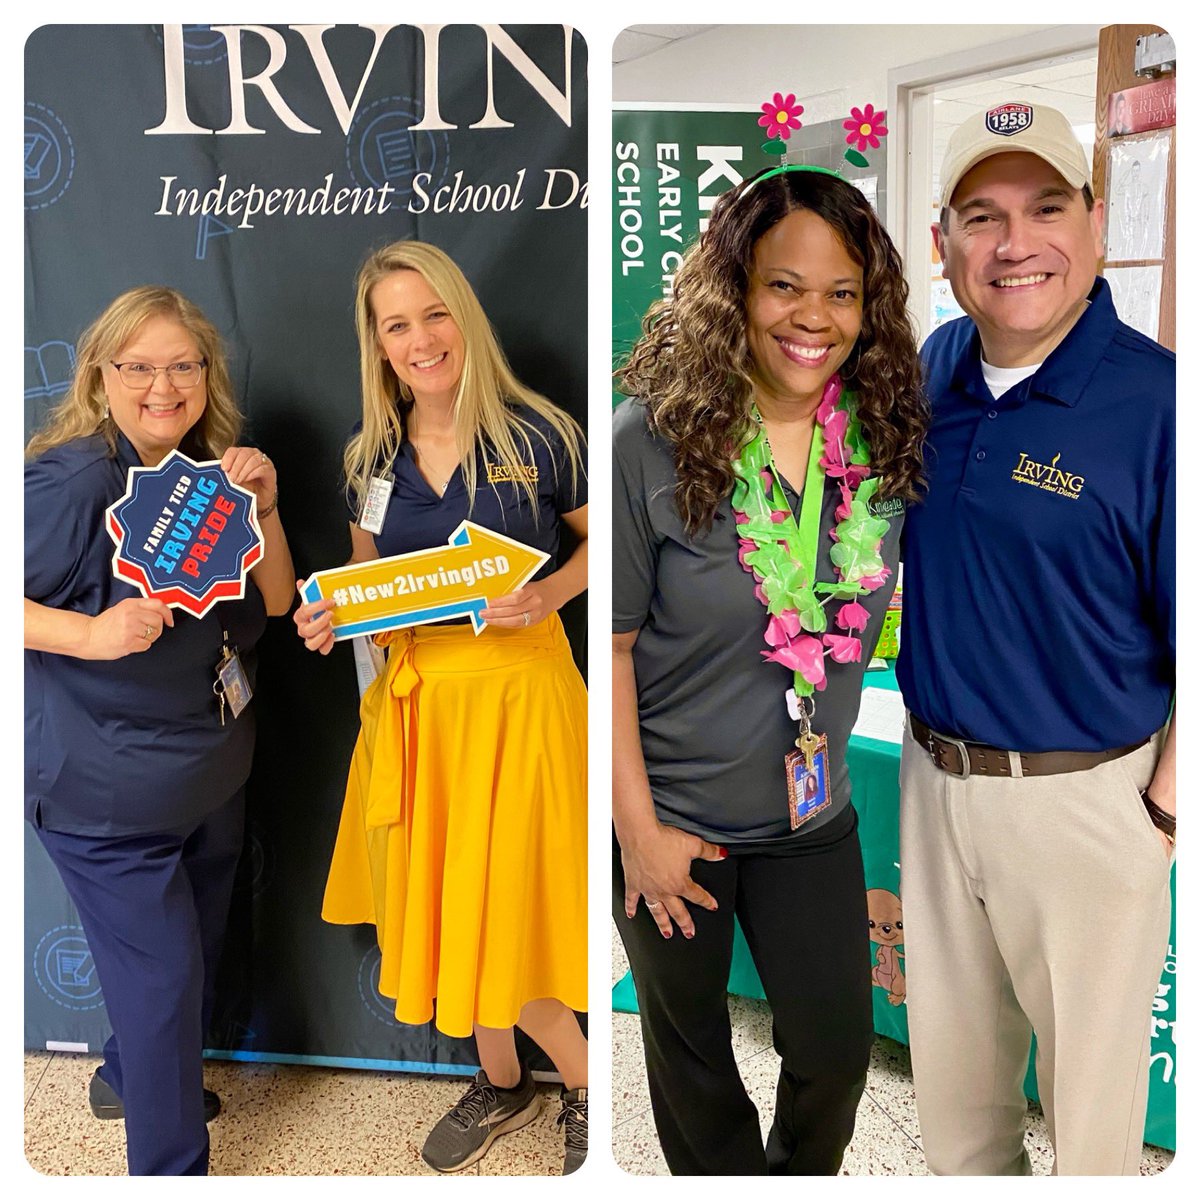 The @IrvingISD Job Fair is officially concluded—outstanding event! Loved seeing our people represent our organization and the educational profession in a true display of grace, professionalism, and brand-pride! Wonderful job Team Irving!!! ❤️💡👏 #myirvingisd 🙏